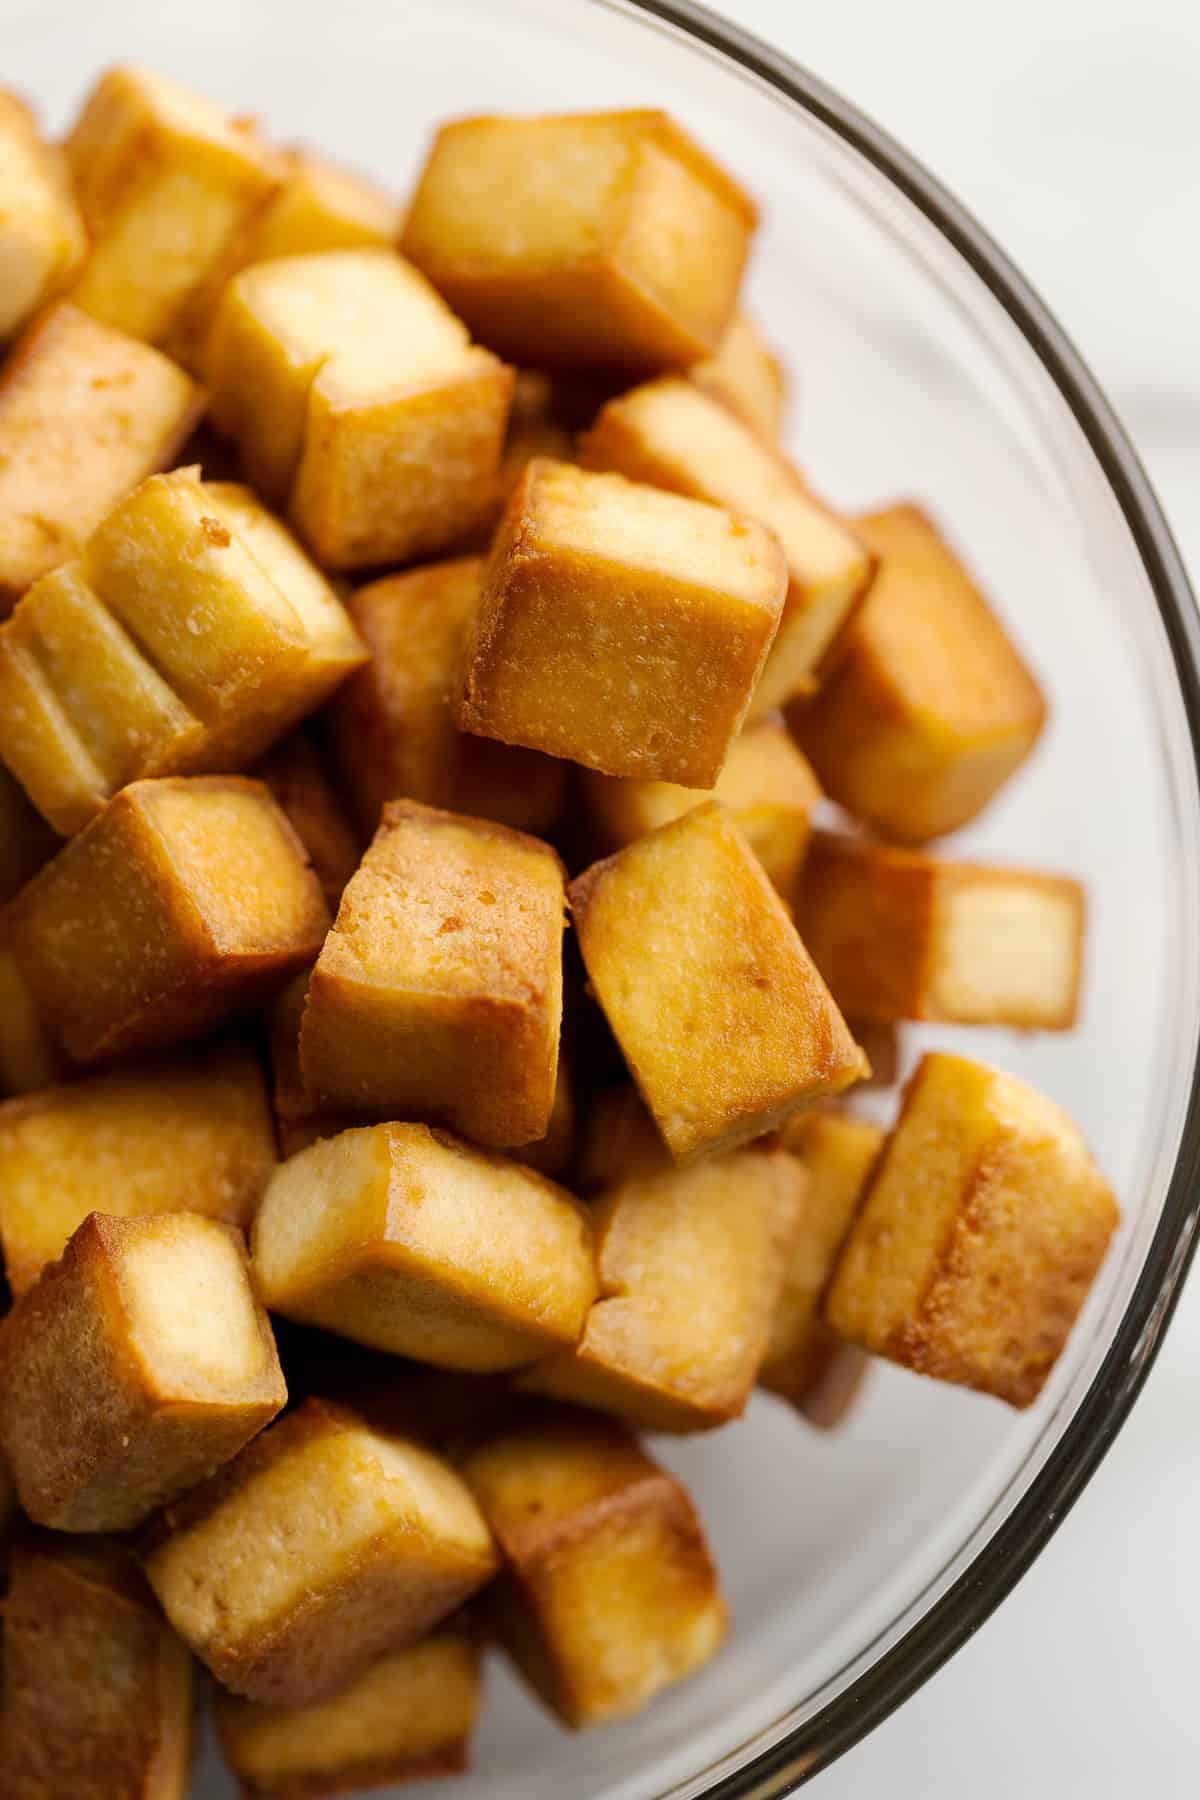 Cubed, browned tofu flavoured with soy sauce.